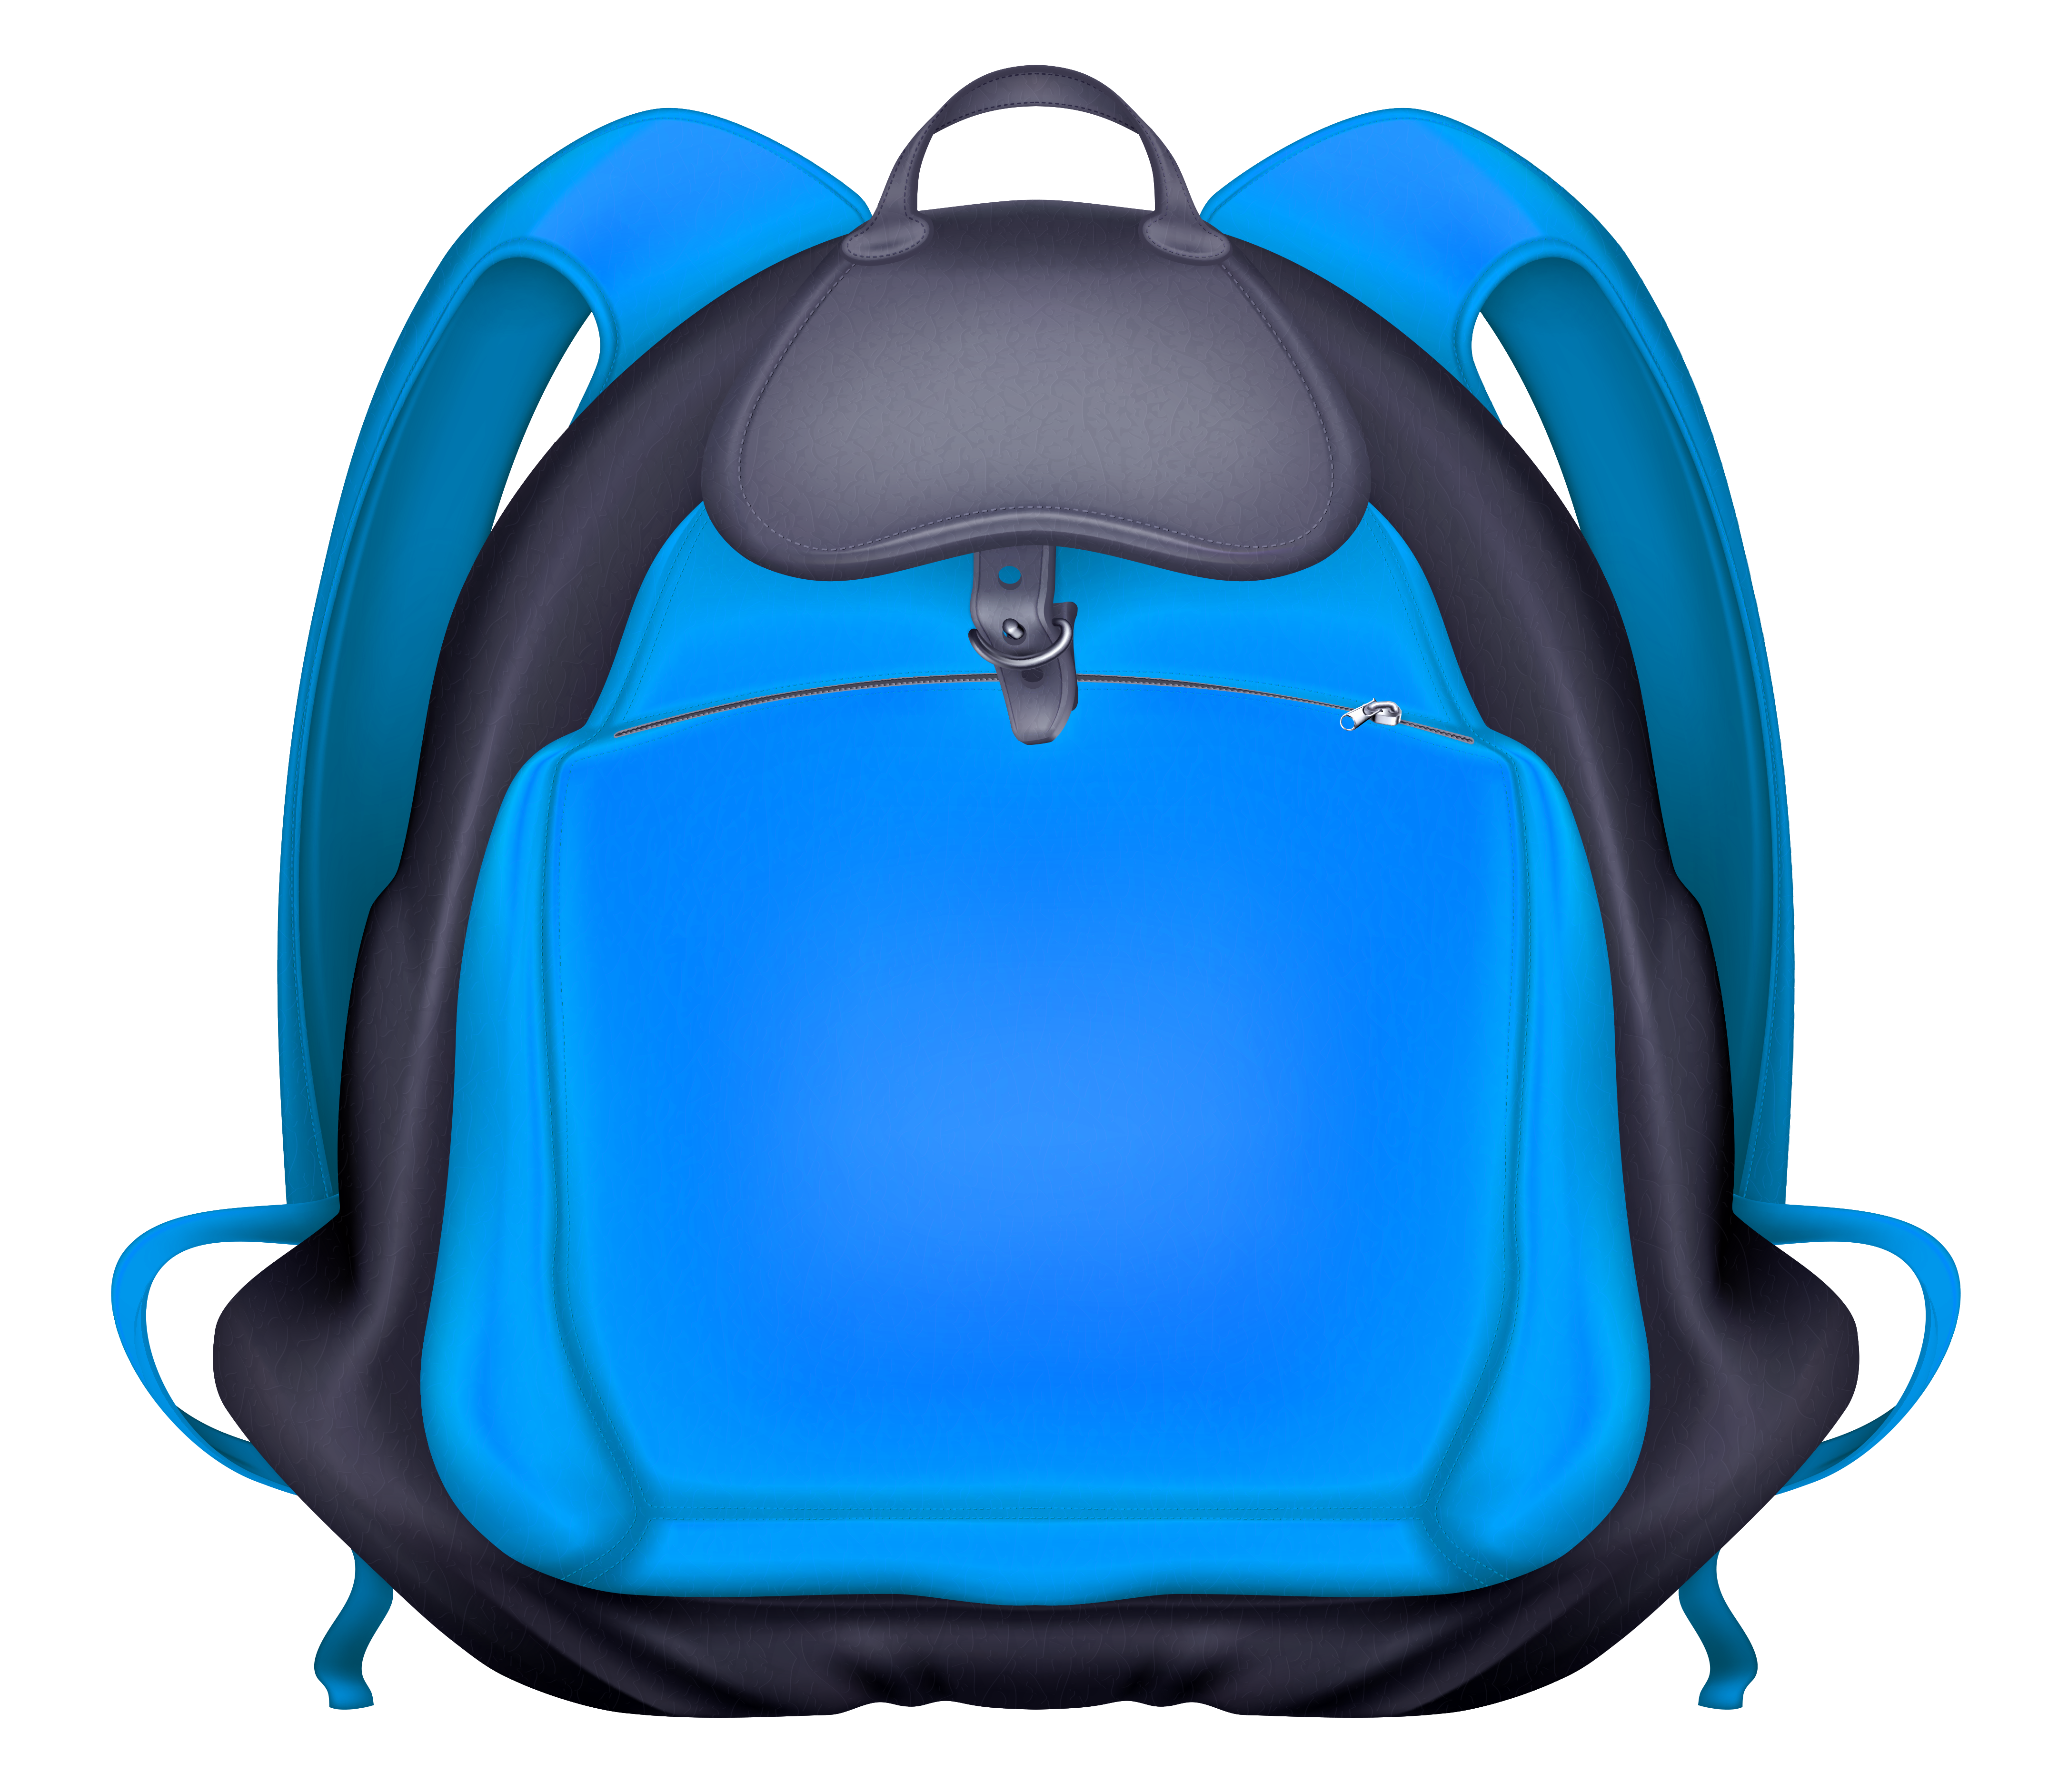 School Bag Clipart Images, Free Download